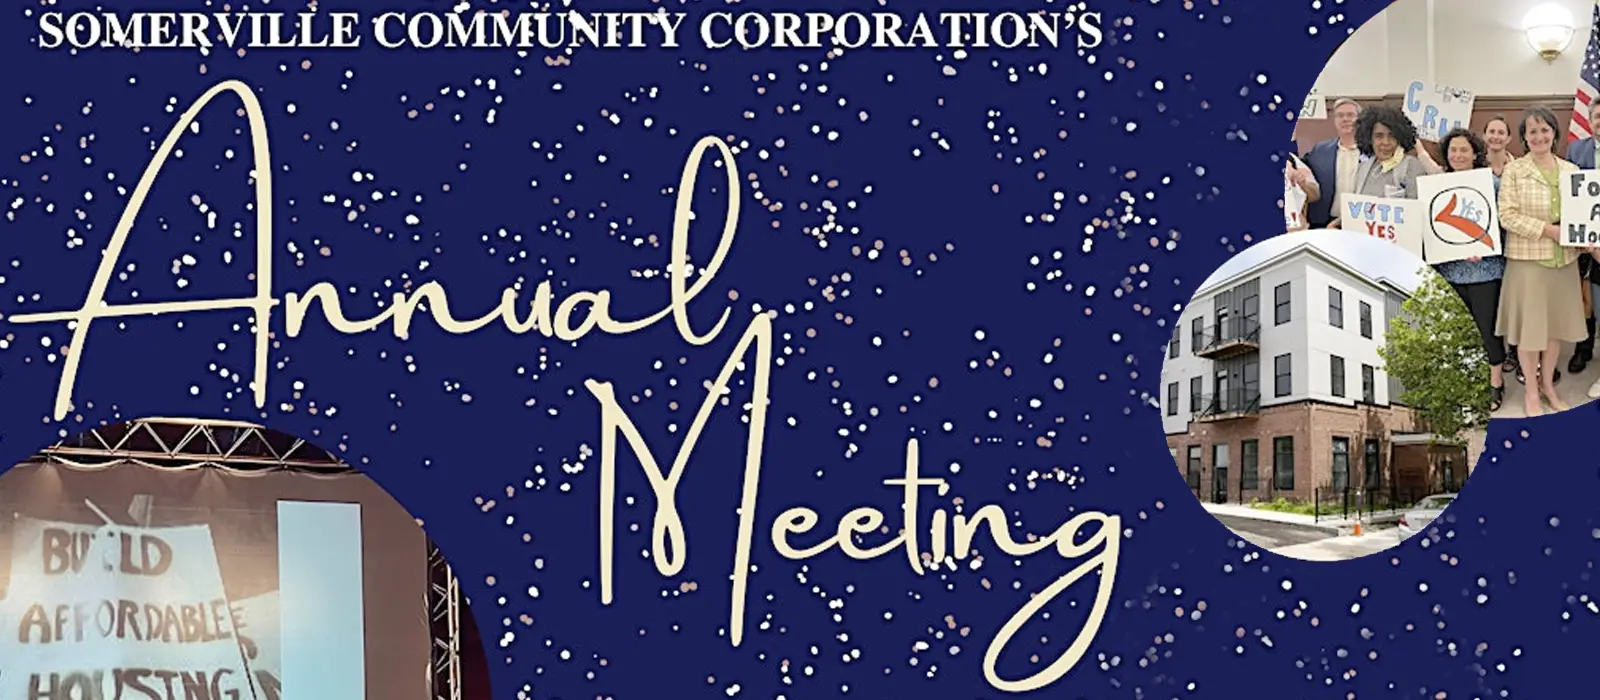 Somerville Community Corporation's Annual Meeting